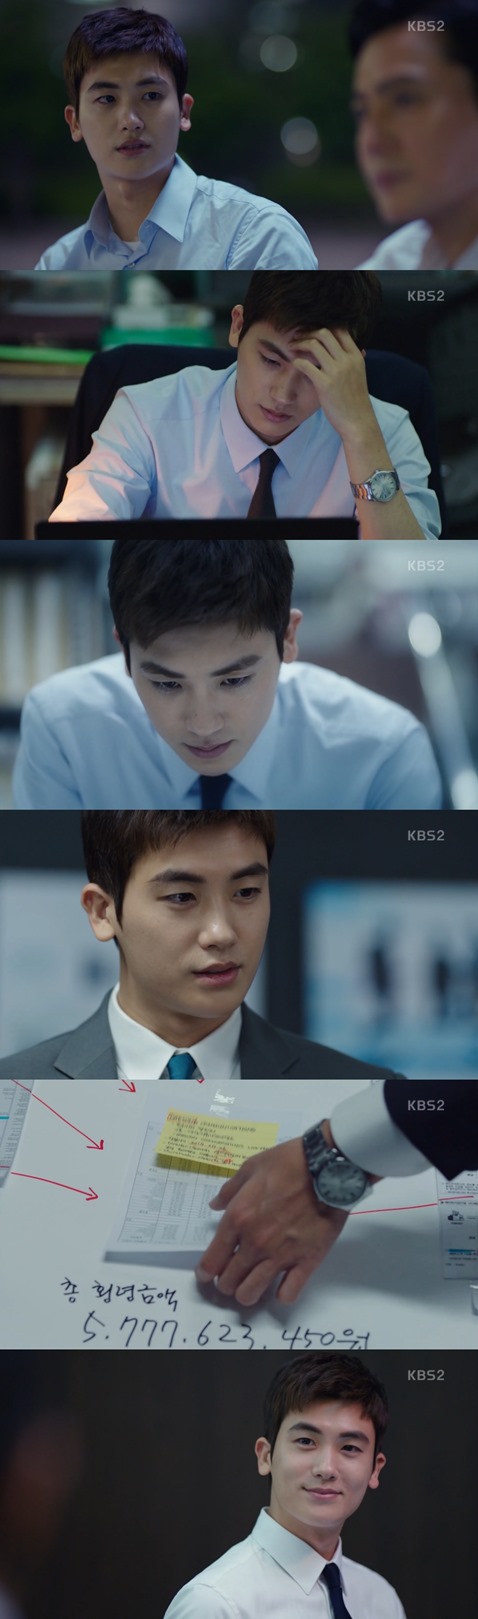 Suits Park Hyung-sik has become a full-time lawyer, although its still fake.Sometimes there are fakes that are more real than real, and there is a real one that gets so used to it or is self-confident that it misses the core.But there are fakes that are not real, so desperate that they can see through the core.It is the story of Park Hyung-sik (played by Ko Yeon-woo) in KBS 2TV Wednesday-Thursday evening drama Suits.In the play, Ko Yeon-woo had always dreamed of a lawyer, had the ability to be, but could not be, because he did not give him that the world was an opportunity.Such a late actress met a miraculous opportunity at the end of the cliff: an opportunity to work as a new lawyer at South Koreas top Law Firm.He was desperate, and he had a chance to get rid of it, and every day he was found out, Danger is growing up as a lawyer in it.The 8th episode of Suits, which aired on the 17th, showed the growth of the late actress implicitly and impactfully.It grasped the core of the case of requesting dismissal of forgery employees and found out the large amount of embezzlement of large accounting corporations.Distribution that does not bend beliefs even though it is pushed to the dismissal Danger, not just seeing events, but seeing people in the case.He showed the same ability and activity more real than a real lawyer.Thanks to this, Ko Yeon-woo led the South Koreas top law firm Gang & Ham representative Kang Ha-yeon (Jin Hee-kyung) to the word formal lawyer from today.Now, Ko is no longer a lawyer for Kang & Ham. He is a formal lawyer.It is natural to expect what kind of performance Ko Yeon-woo, who showed such outstanding ability and unstoppable growth when assisting Choi Kang-seoks work as a lawyer for probation, will perform when he becomes a regular lawyer.In fact, Suits is a kind of growth drama from the standpoint of Ko Yeon-woo, which is also a counter-electrode that overturns the preconceptions that are framed.This is a storyline that can draw consensus, but the character itself, with its genius matching king, is not common: it must contain both opposite aspects.The role of the actor is an important role.In this sense, the performance of Park Hyung-sik, an actor in Suits, is worth noting.It shows the sense of flexibly changing characters according to the situation change, the concentration of acting ability that leads to the audiences empathy and immersion, and the excellent expressive power that surrounds all of these.As the drama grows more and more, the deepening acting comes to a greater charm.Park Hyung-sik, an actor in Suits, is a brilliant and attractive reason for viewers.Meanwhile, KBS 2TV Wednesday-Thursday Evening drama Suits is a drama depicting the bromance of a fake new lawyer with a legendary lawyer of South Koreas top law firm and a genius matching king.It airs every Wednesday and Thursday night at 10 p.m.Photo: KBS 2TV Wednesday-Thursday Evening drama Suits broadcast capture